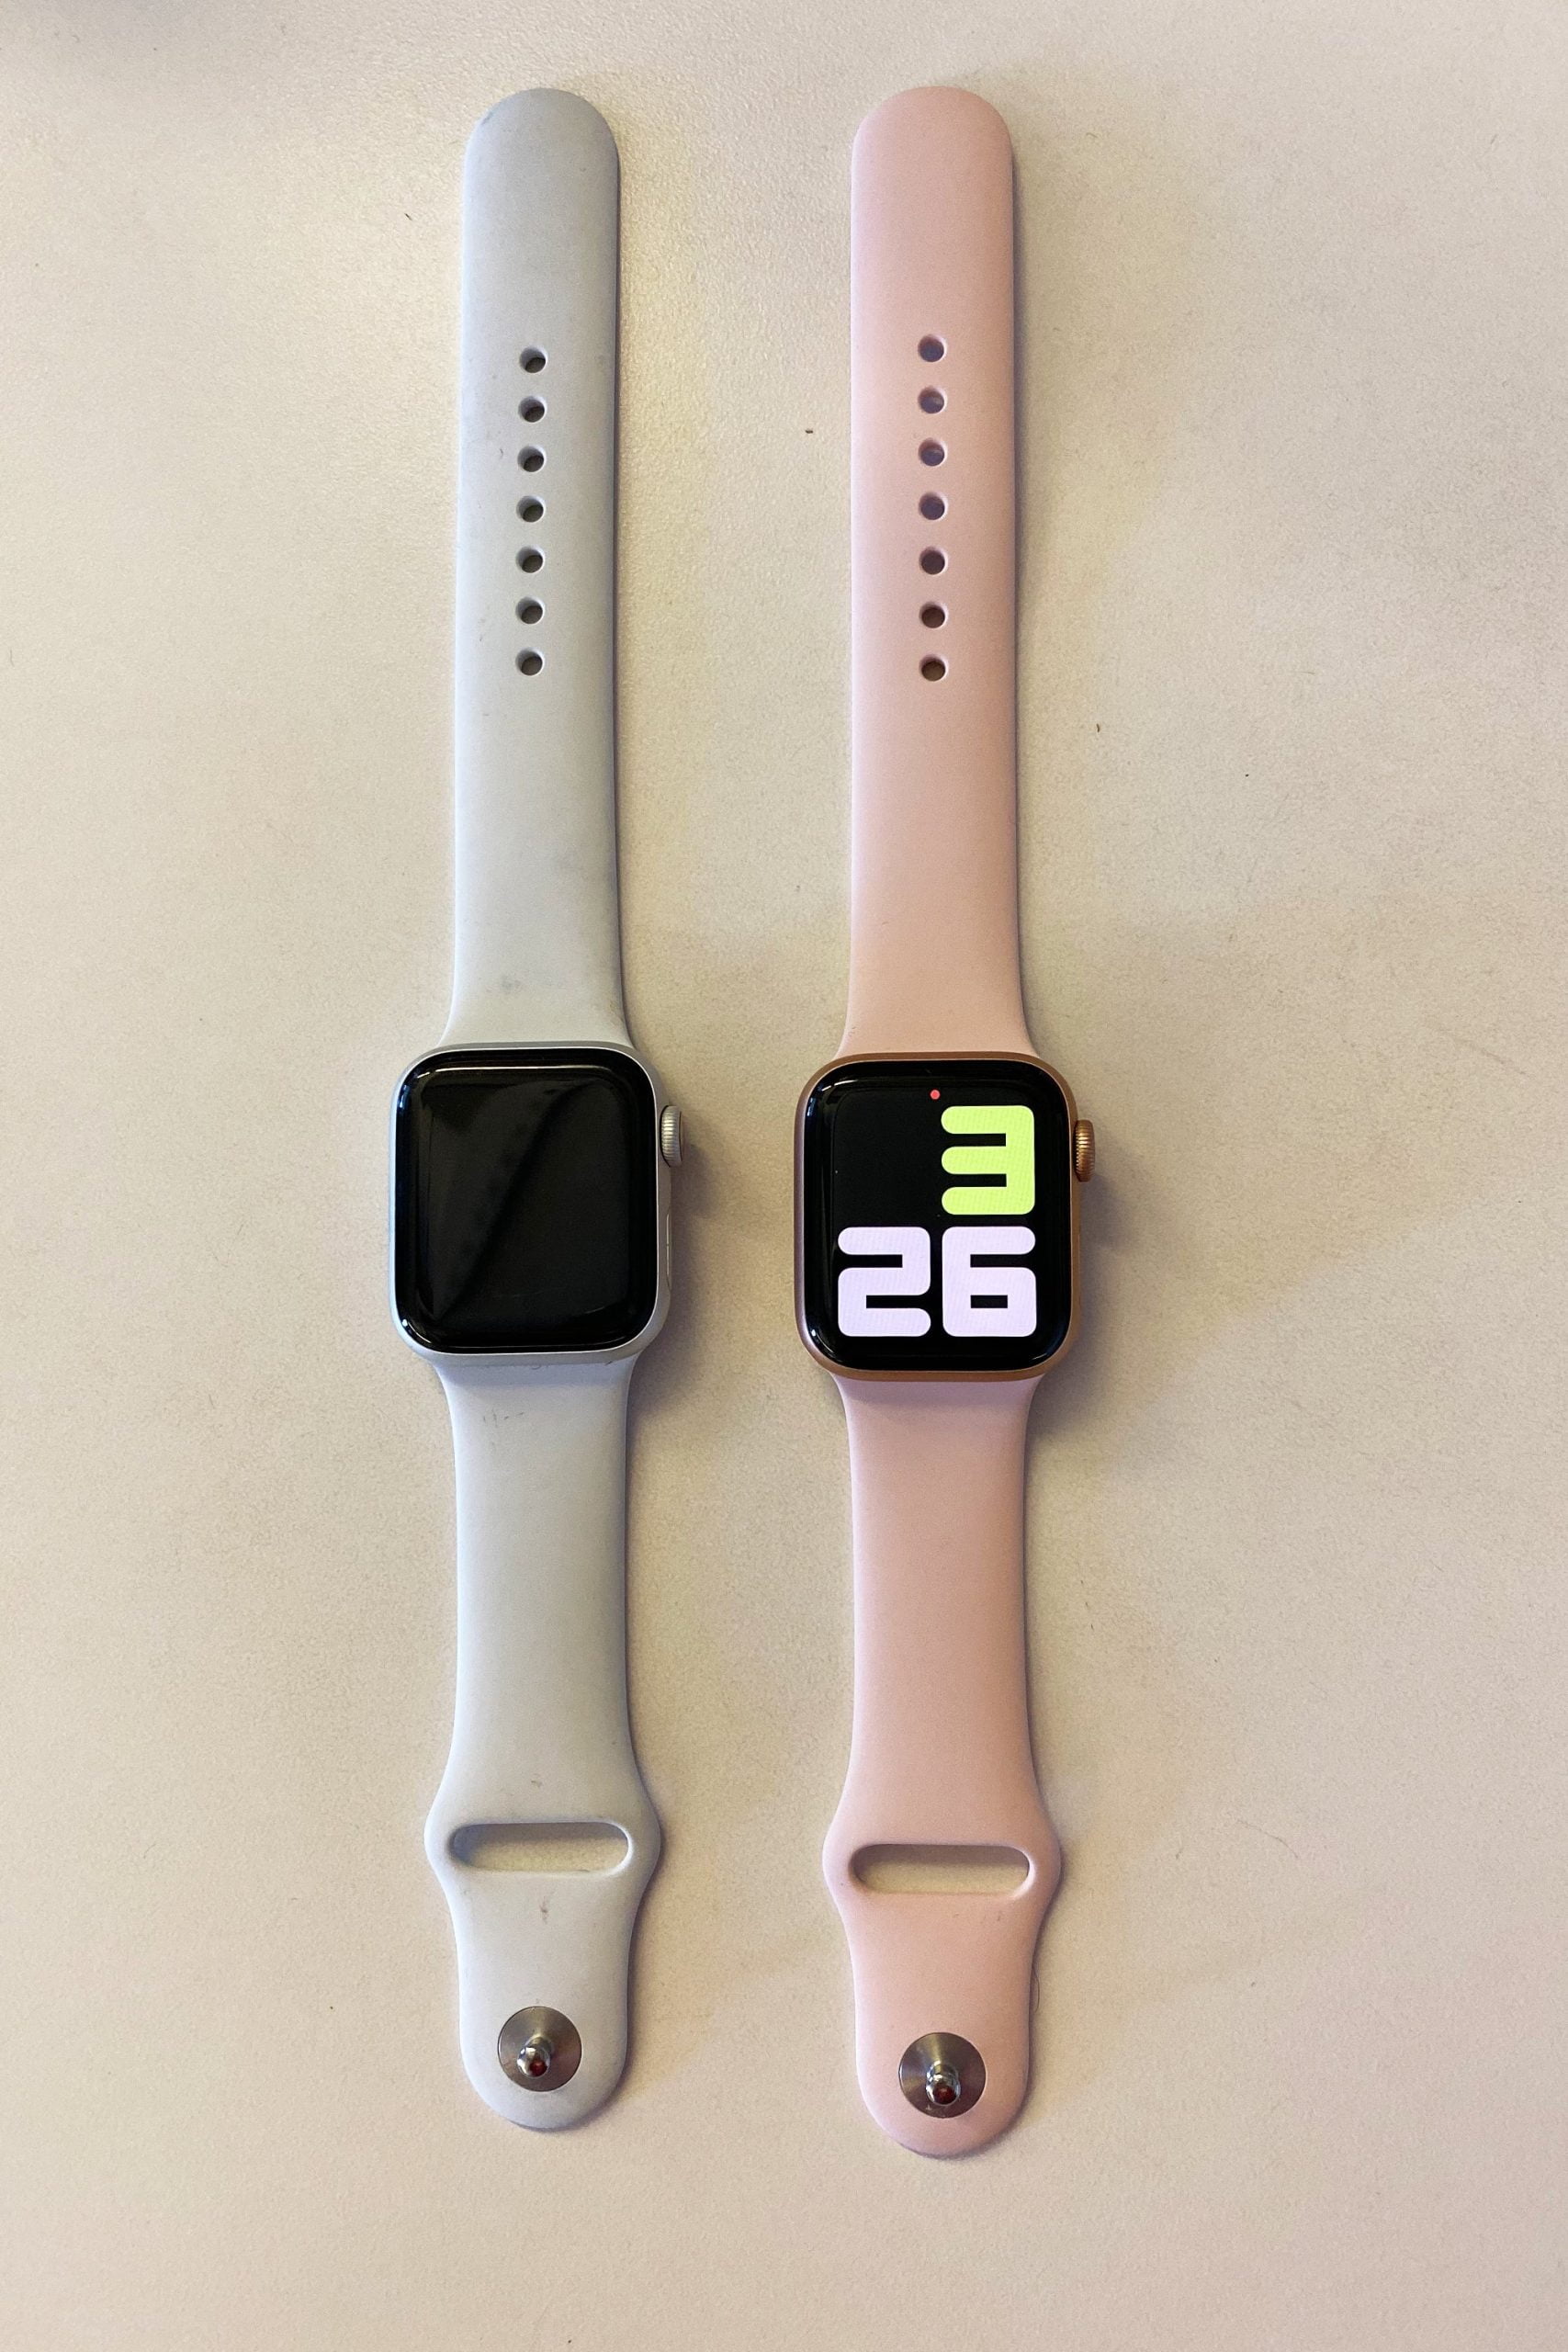 How much does it cost to change the screen to an Apple Watch